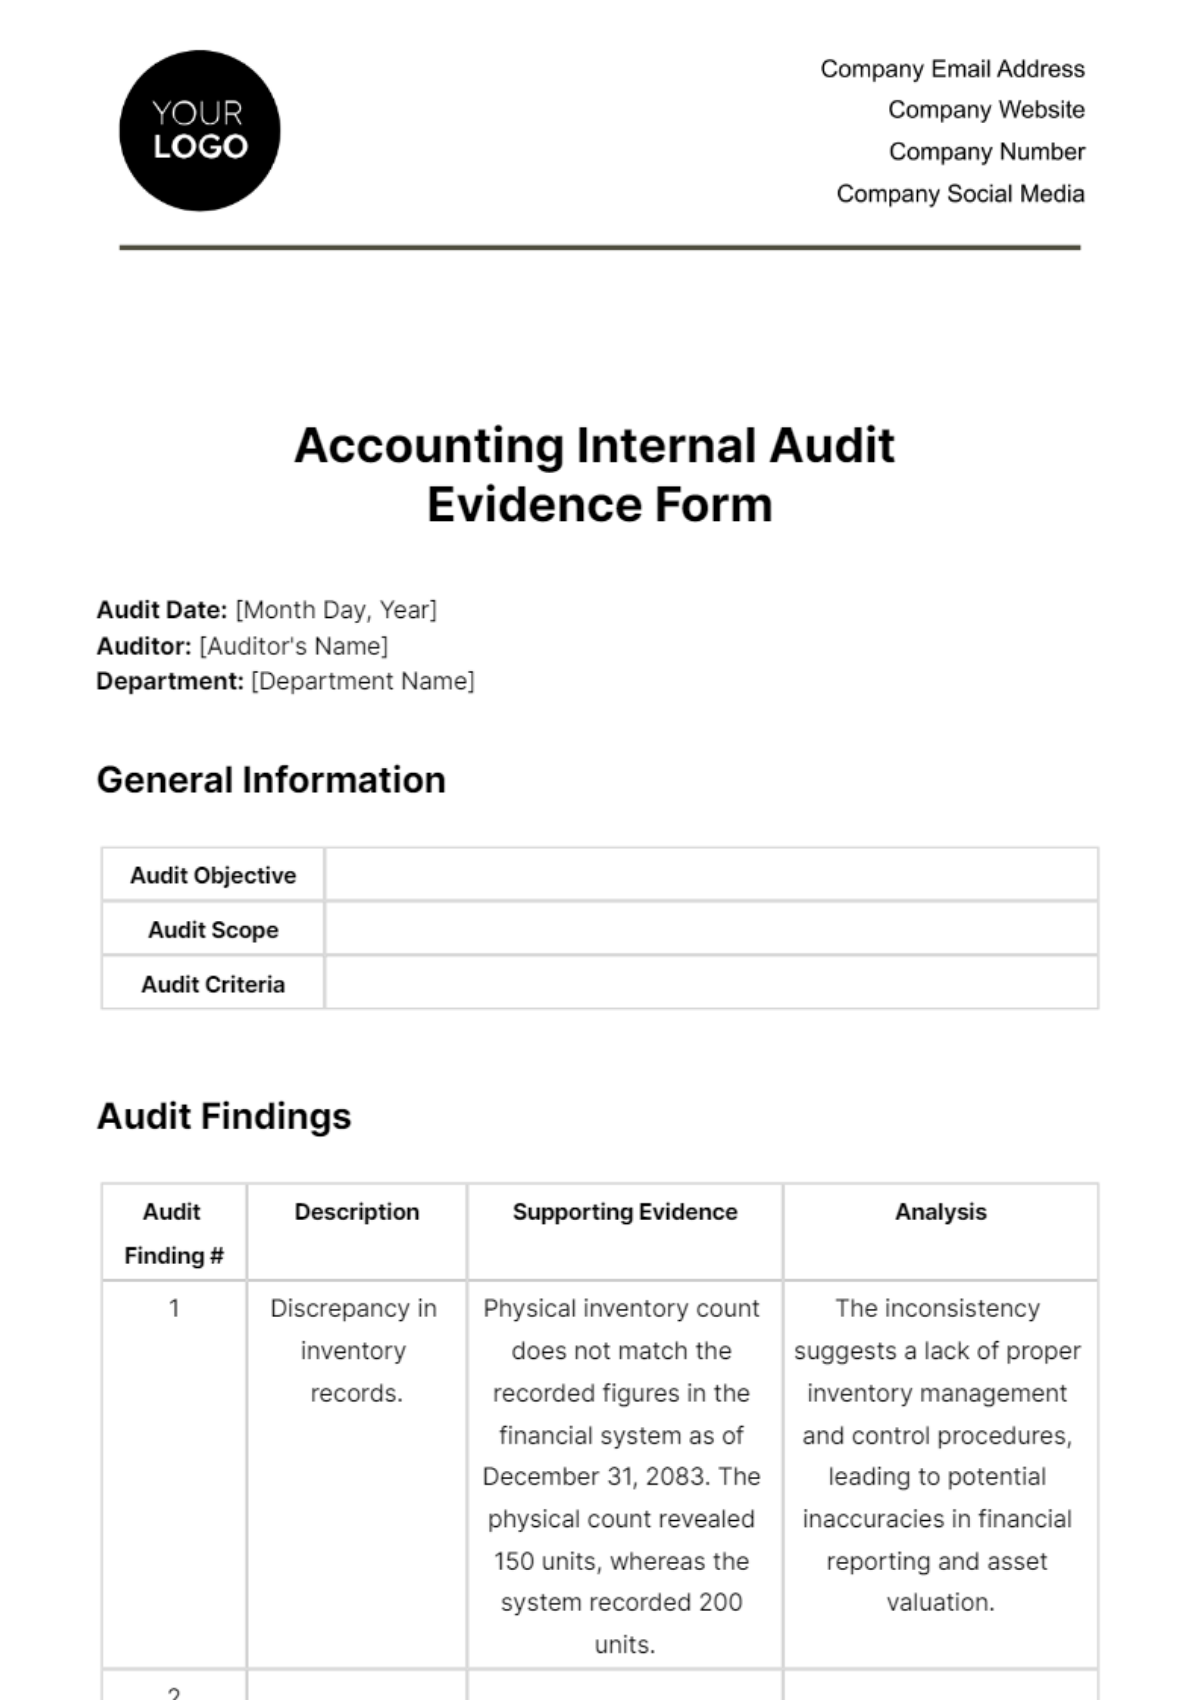 Accounting Internal Audit Evidence Form Template